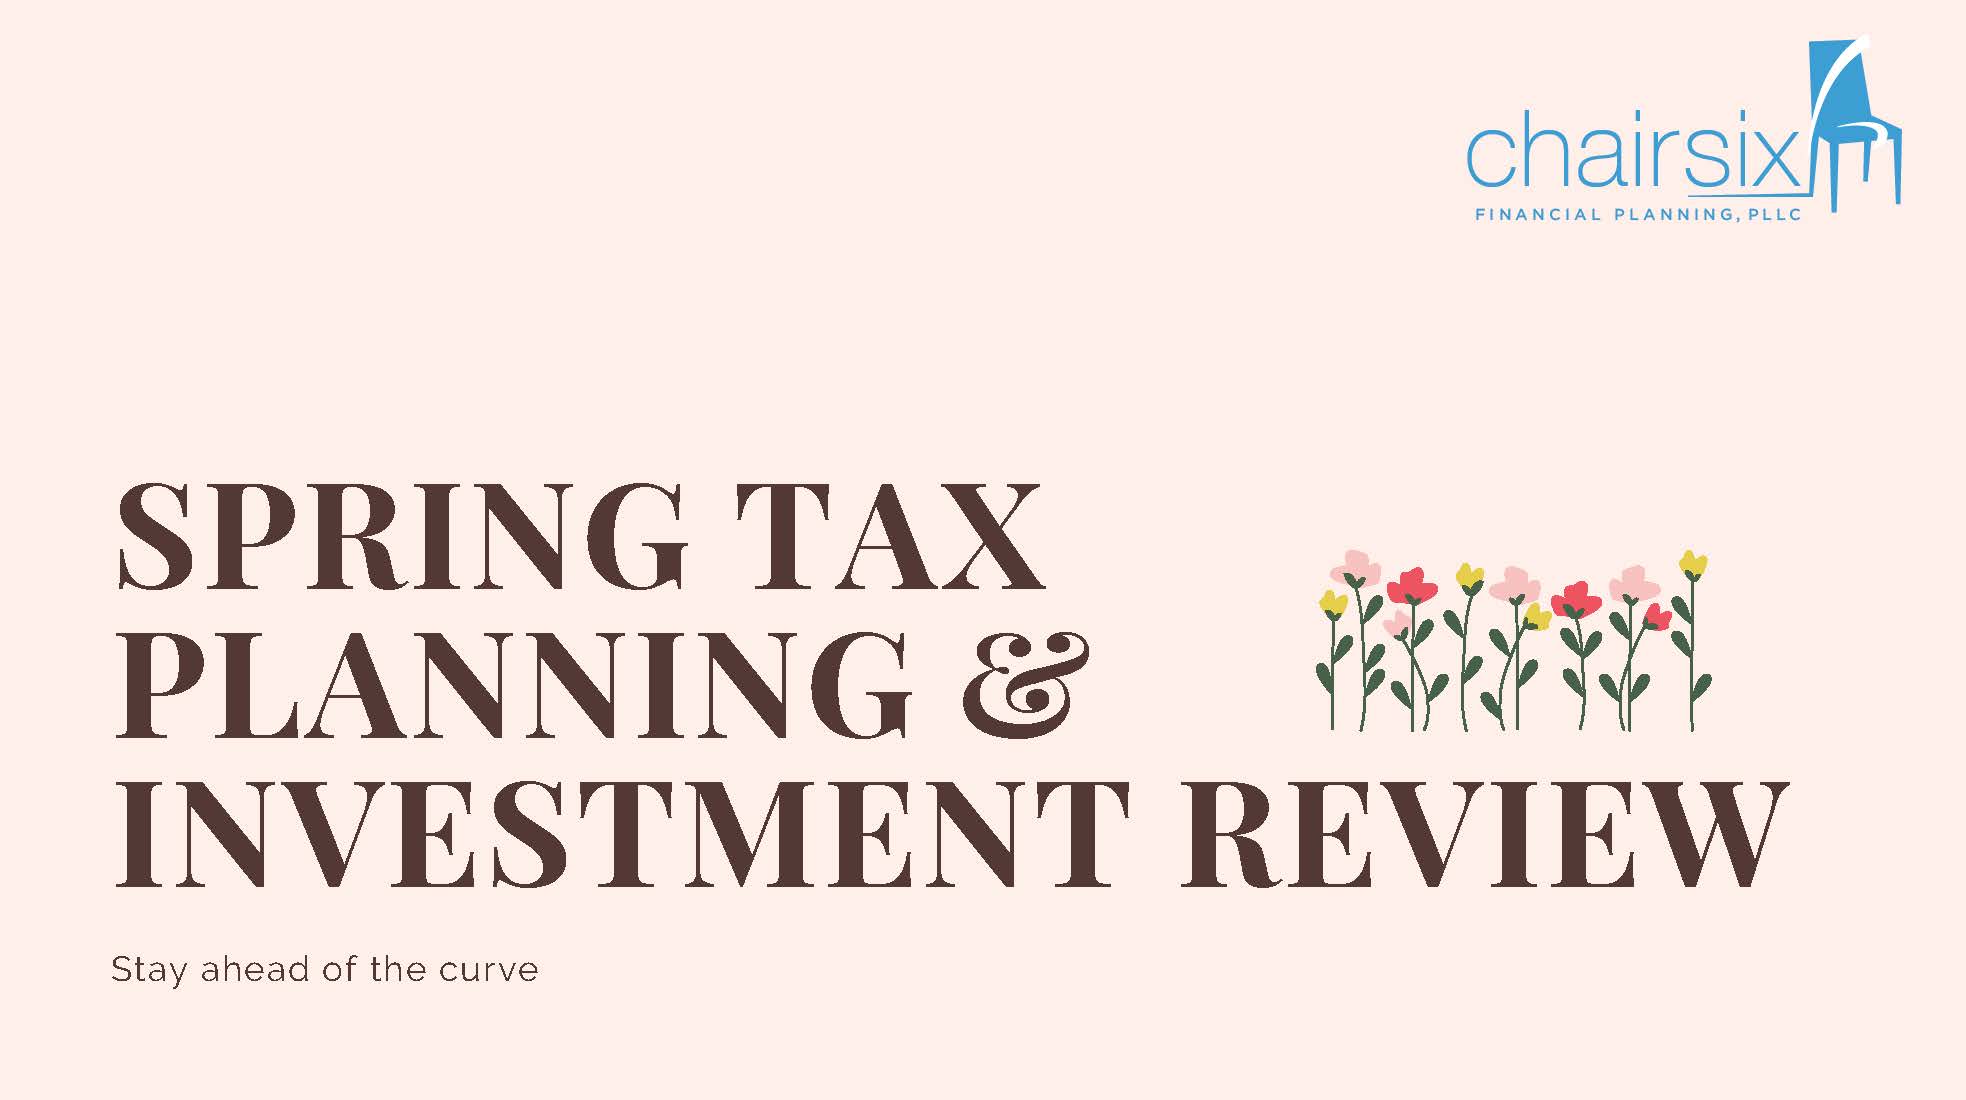 Spring Tax Planning & Investment Review